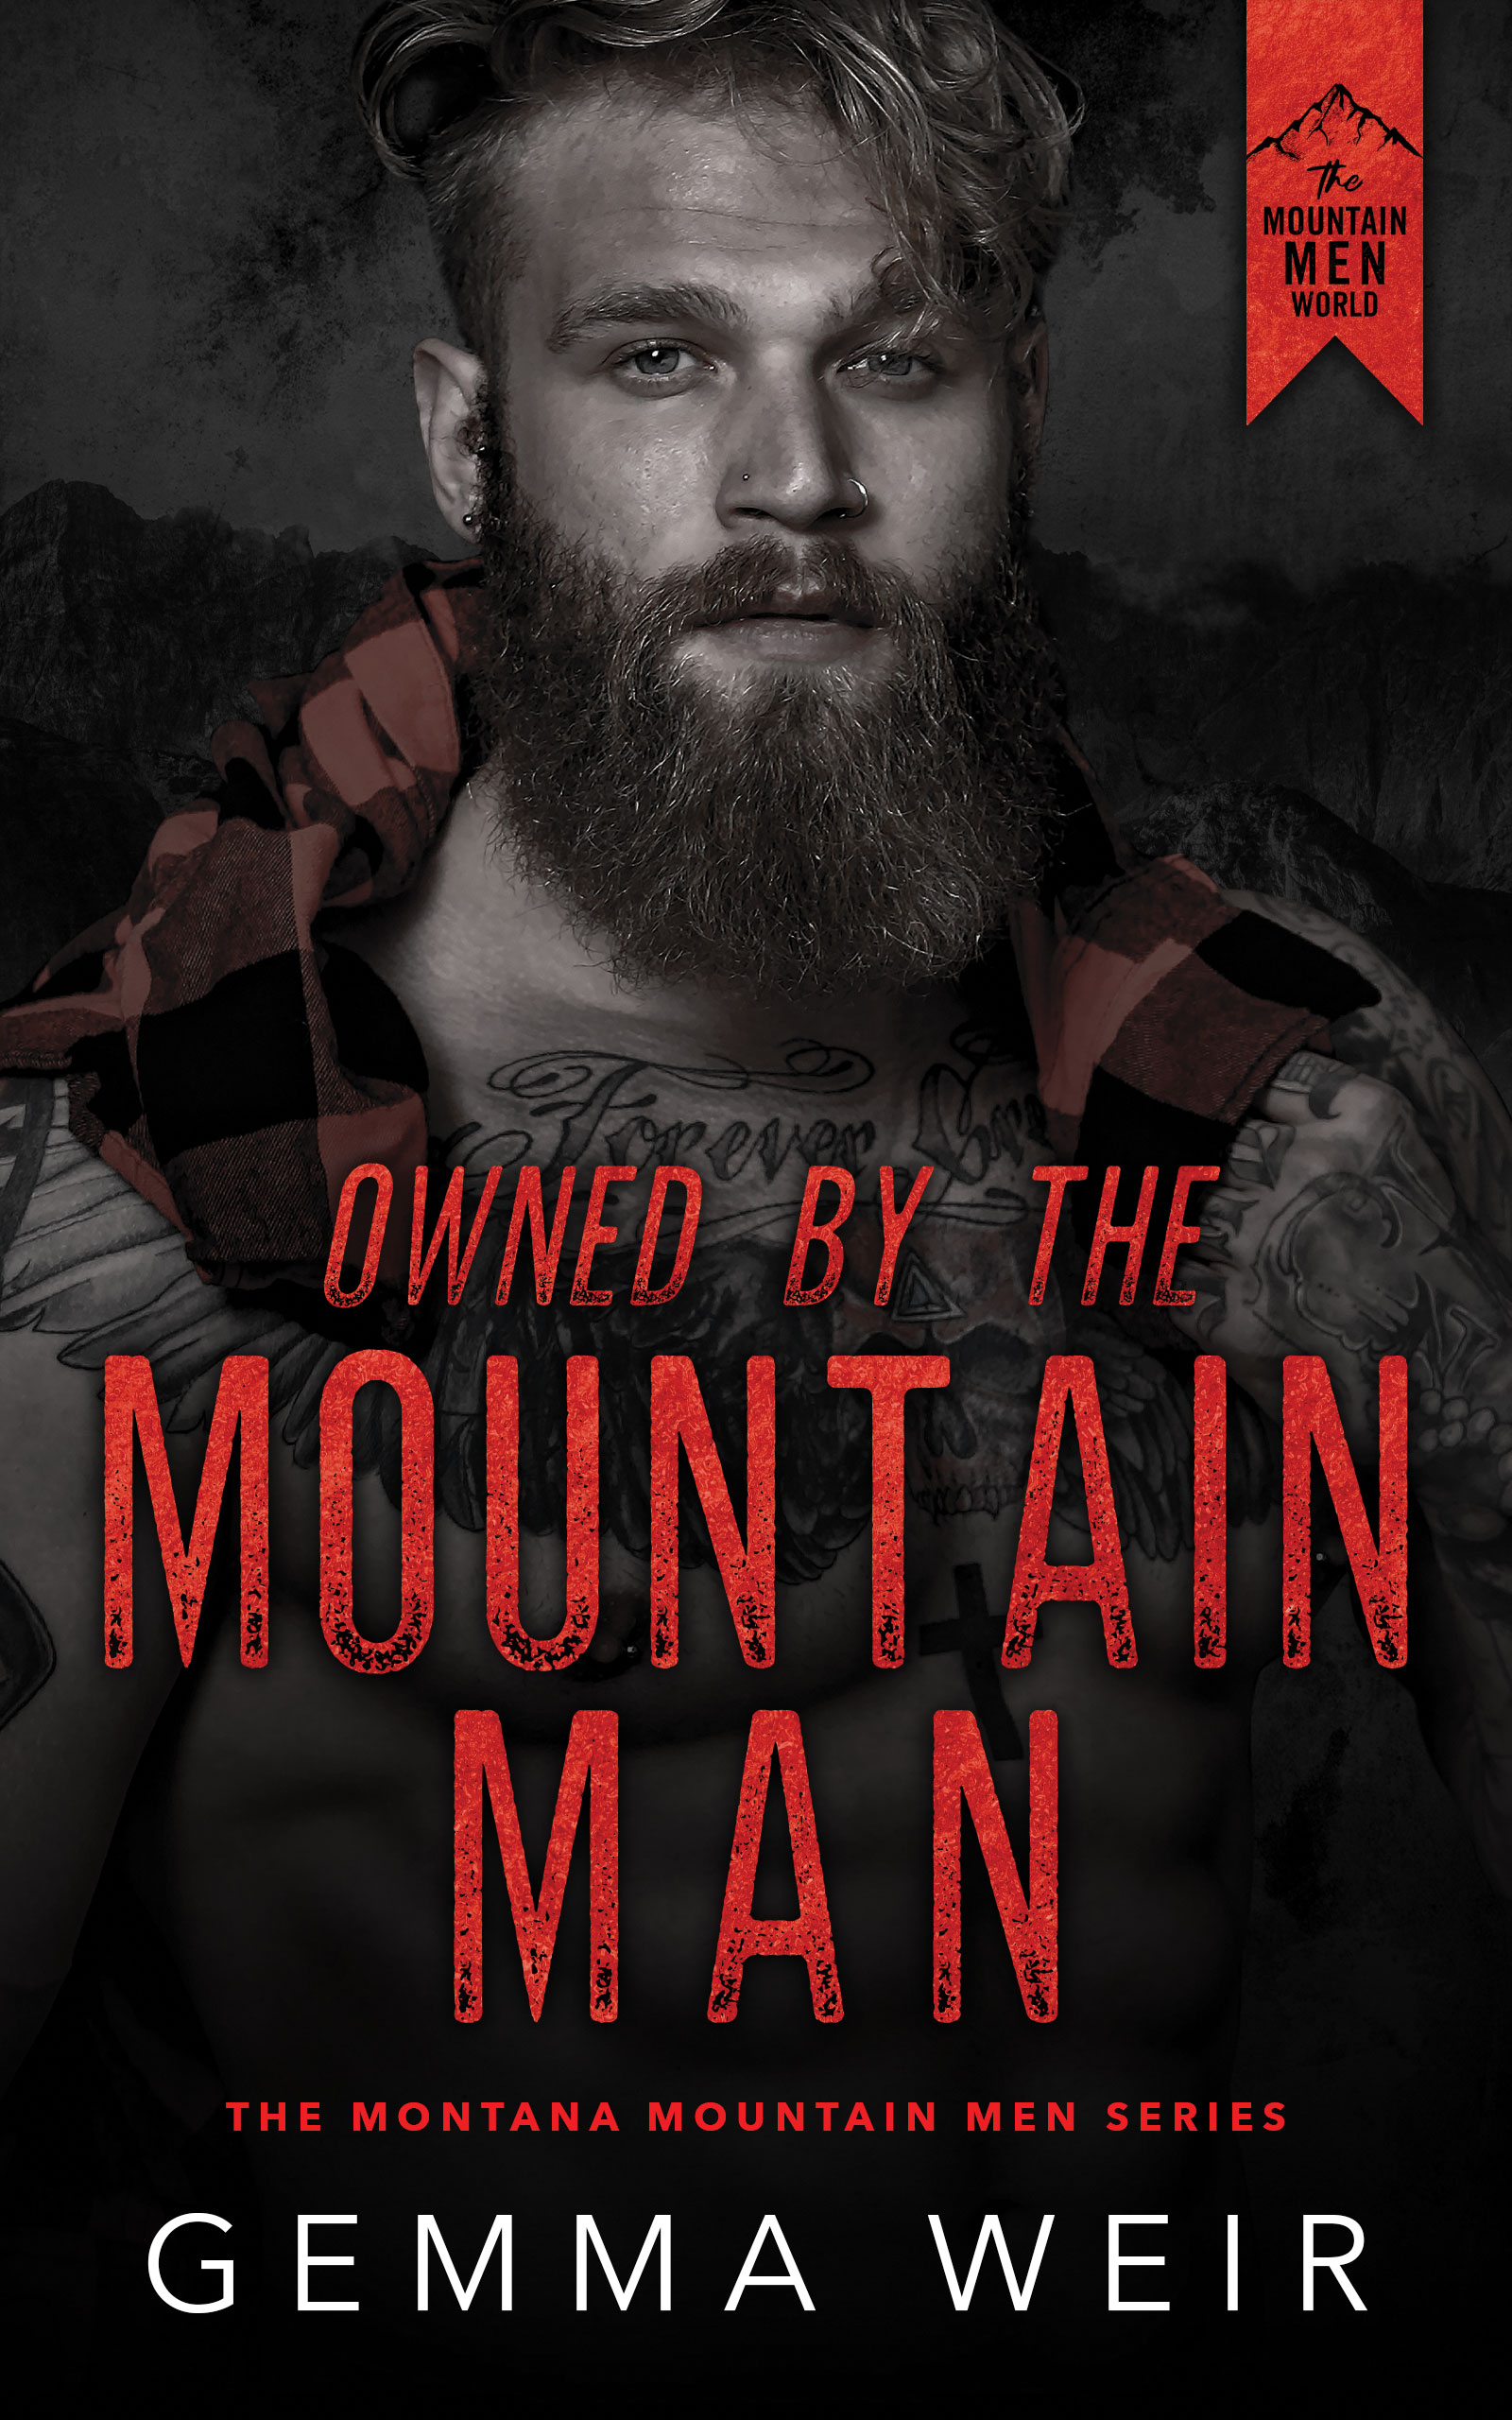 Owned by the Mountain Man - ebook